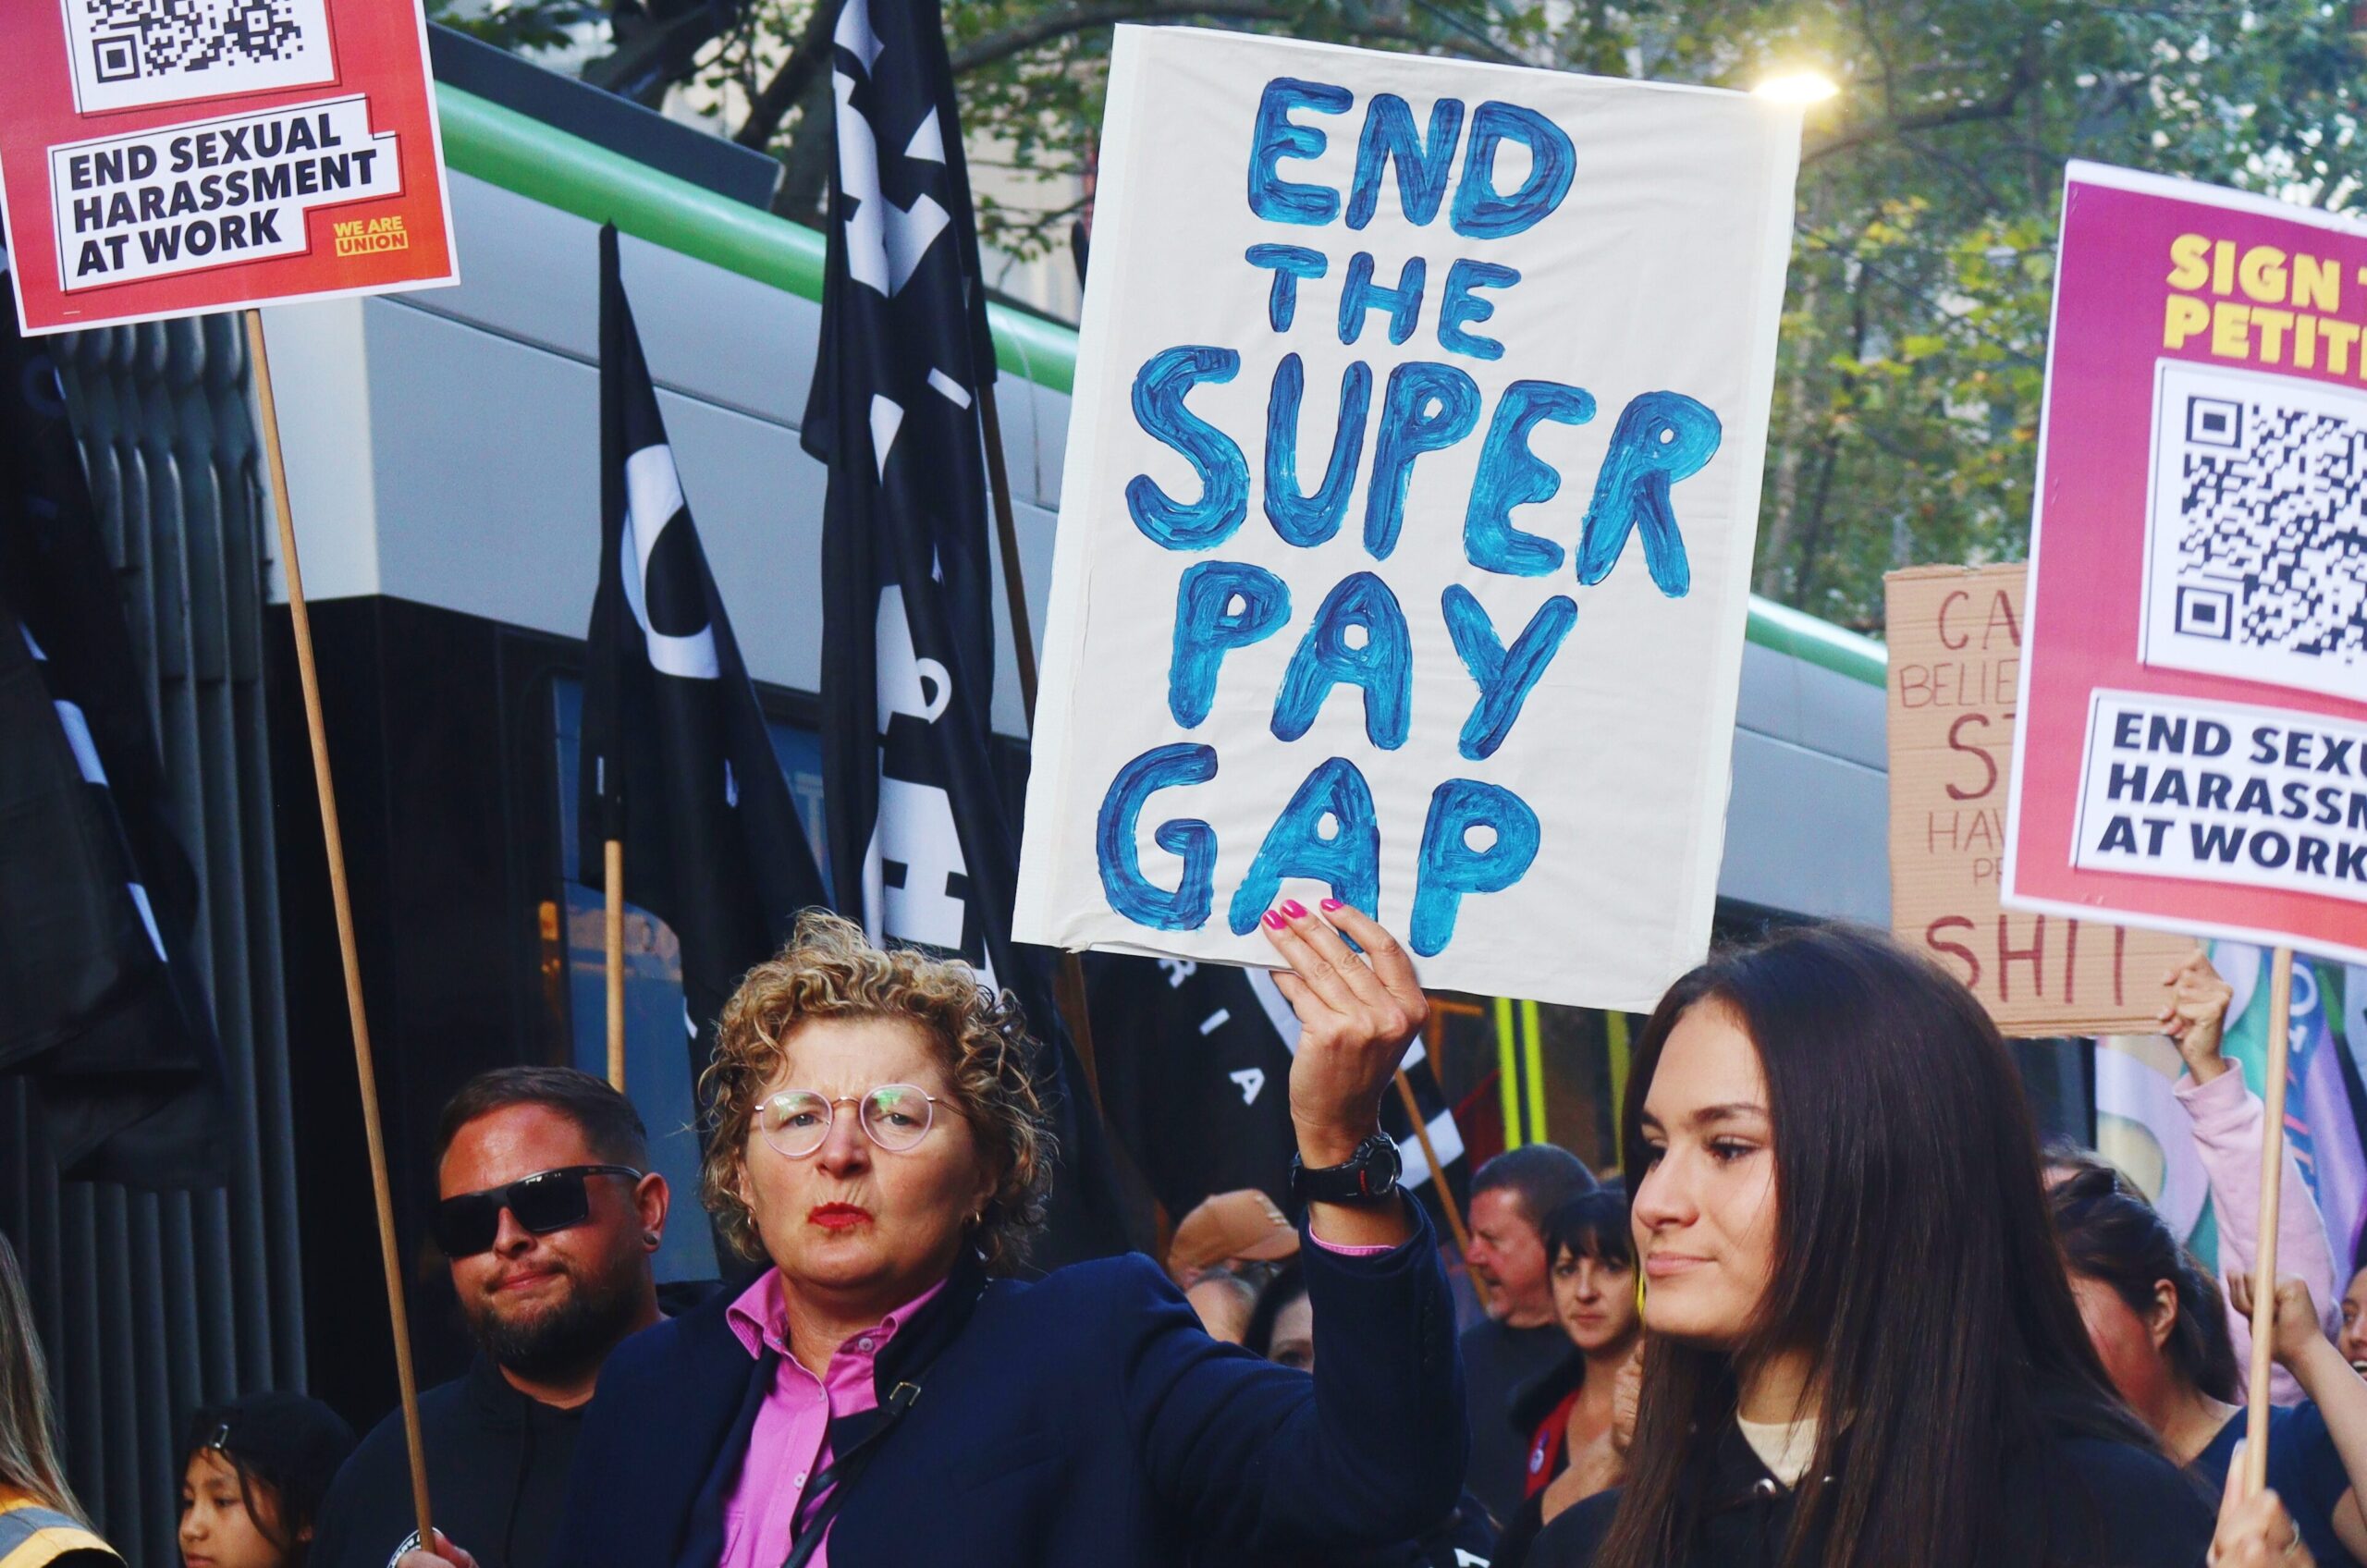 A union member holds up a sign that says: 'End the super pay gap'